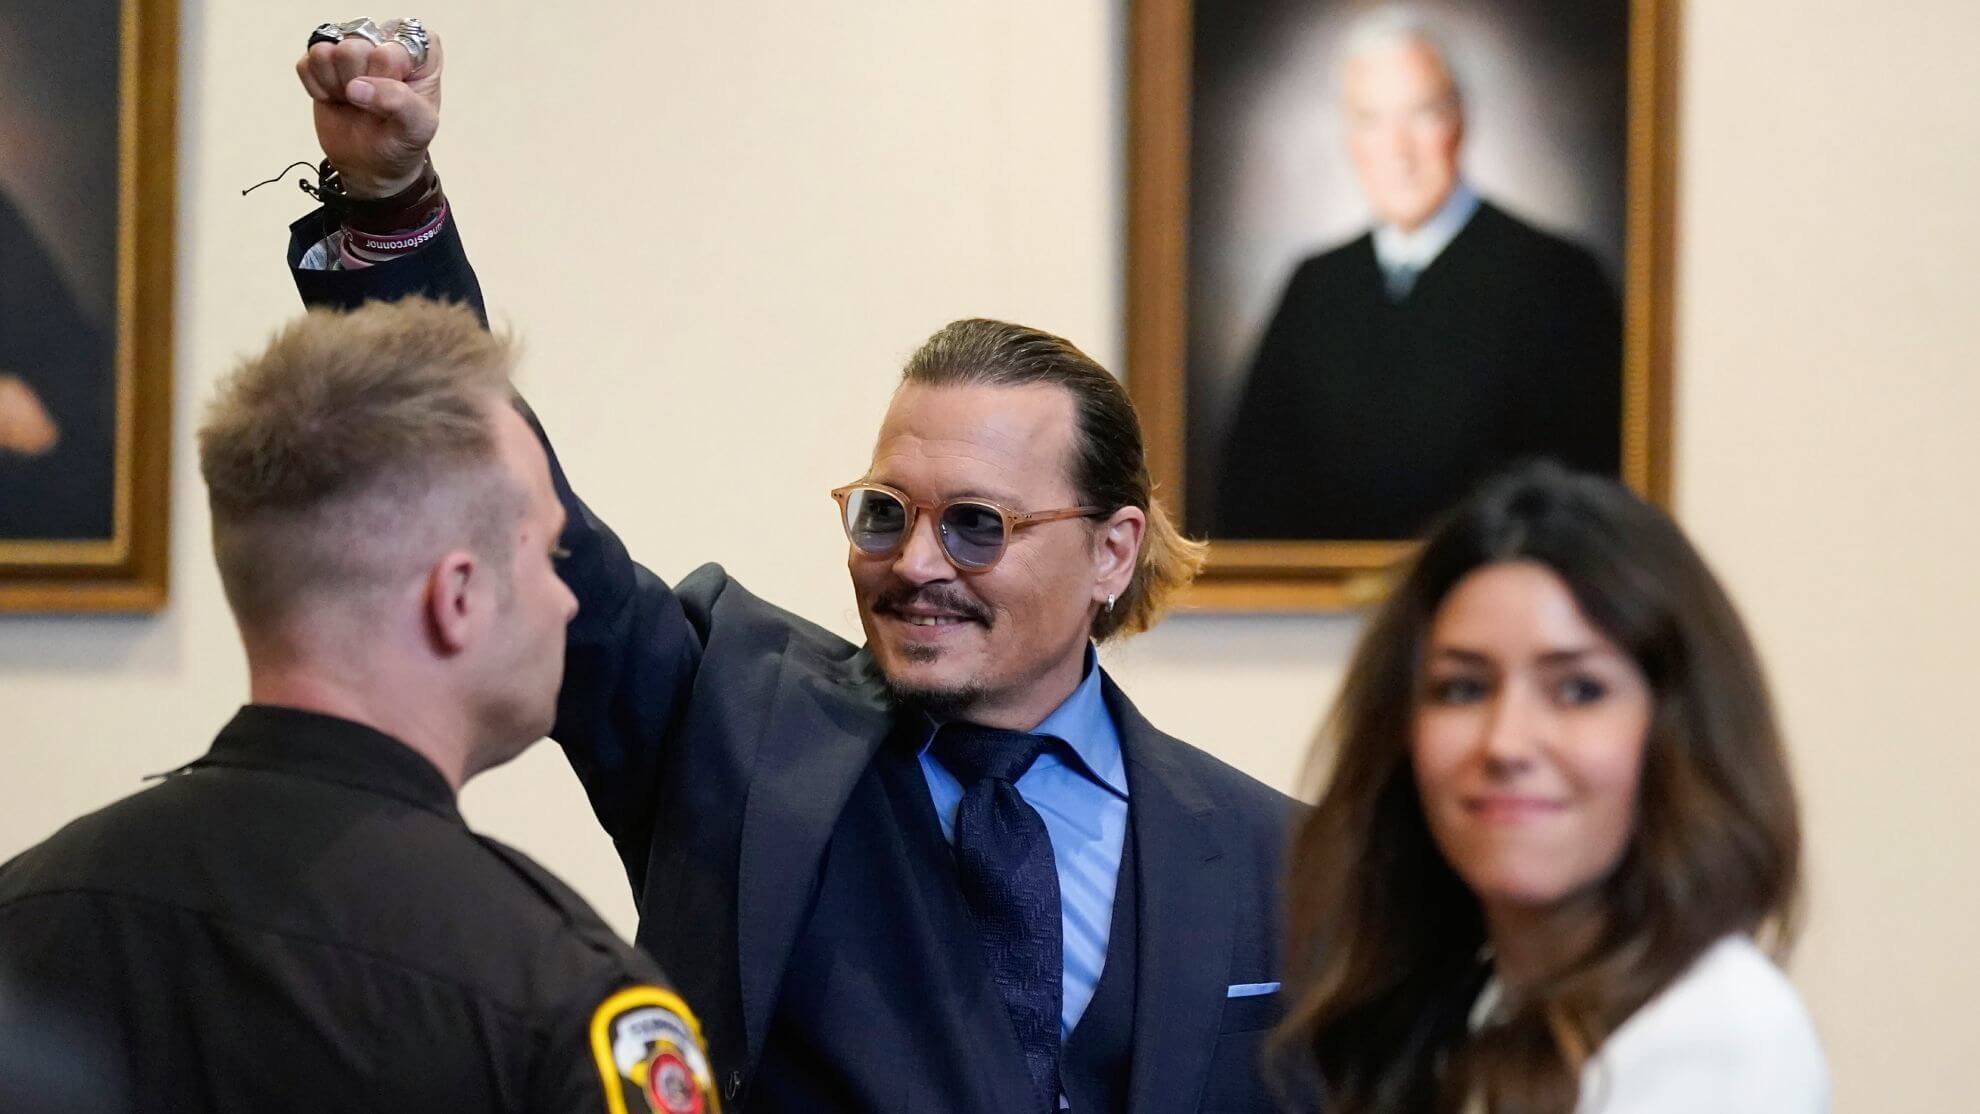 Johnny Depp on his victory